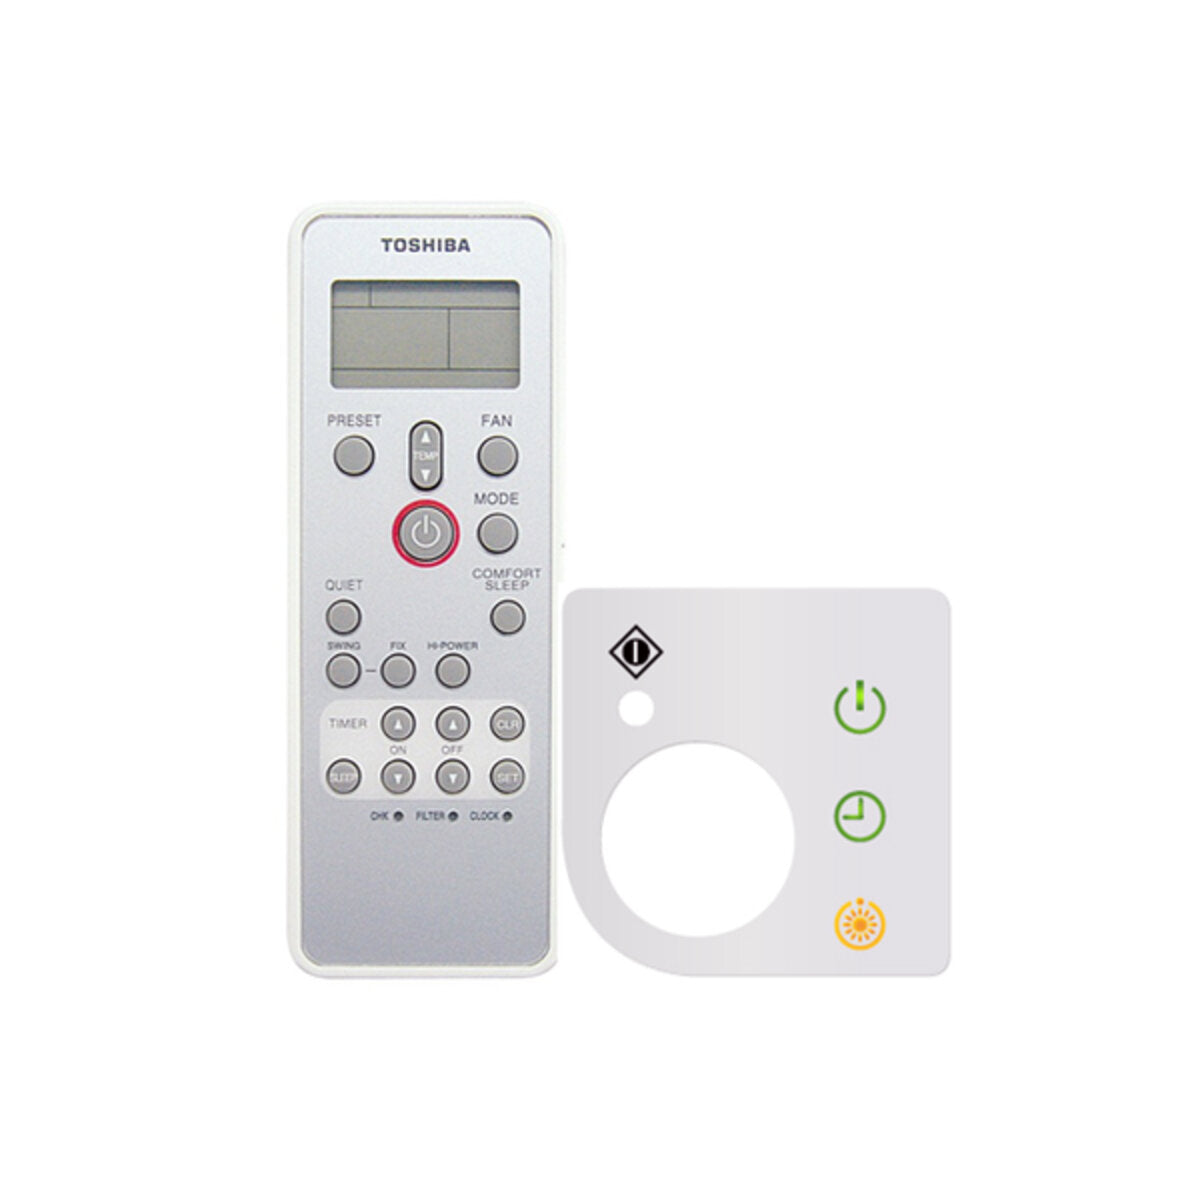 Remote control + Toshiba infrared receiver for 60x60 compact cassette